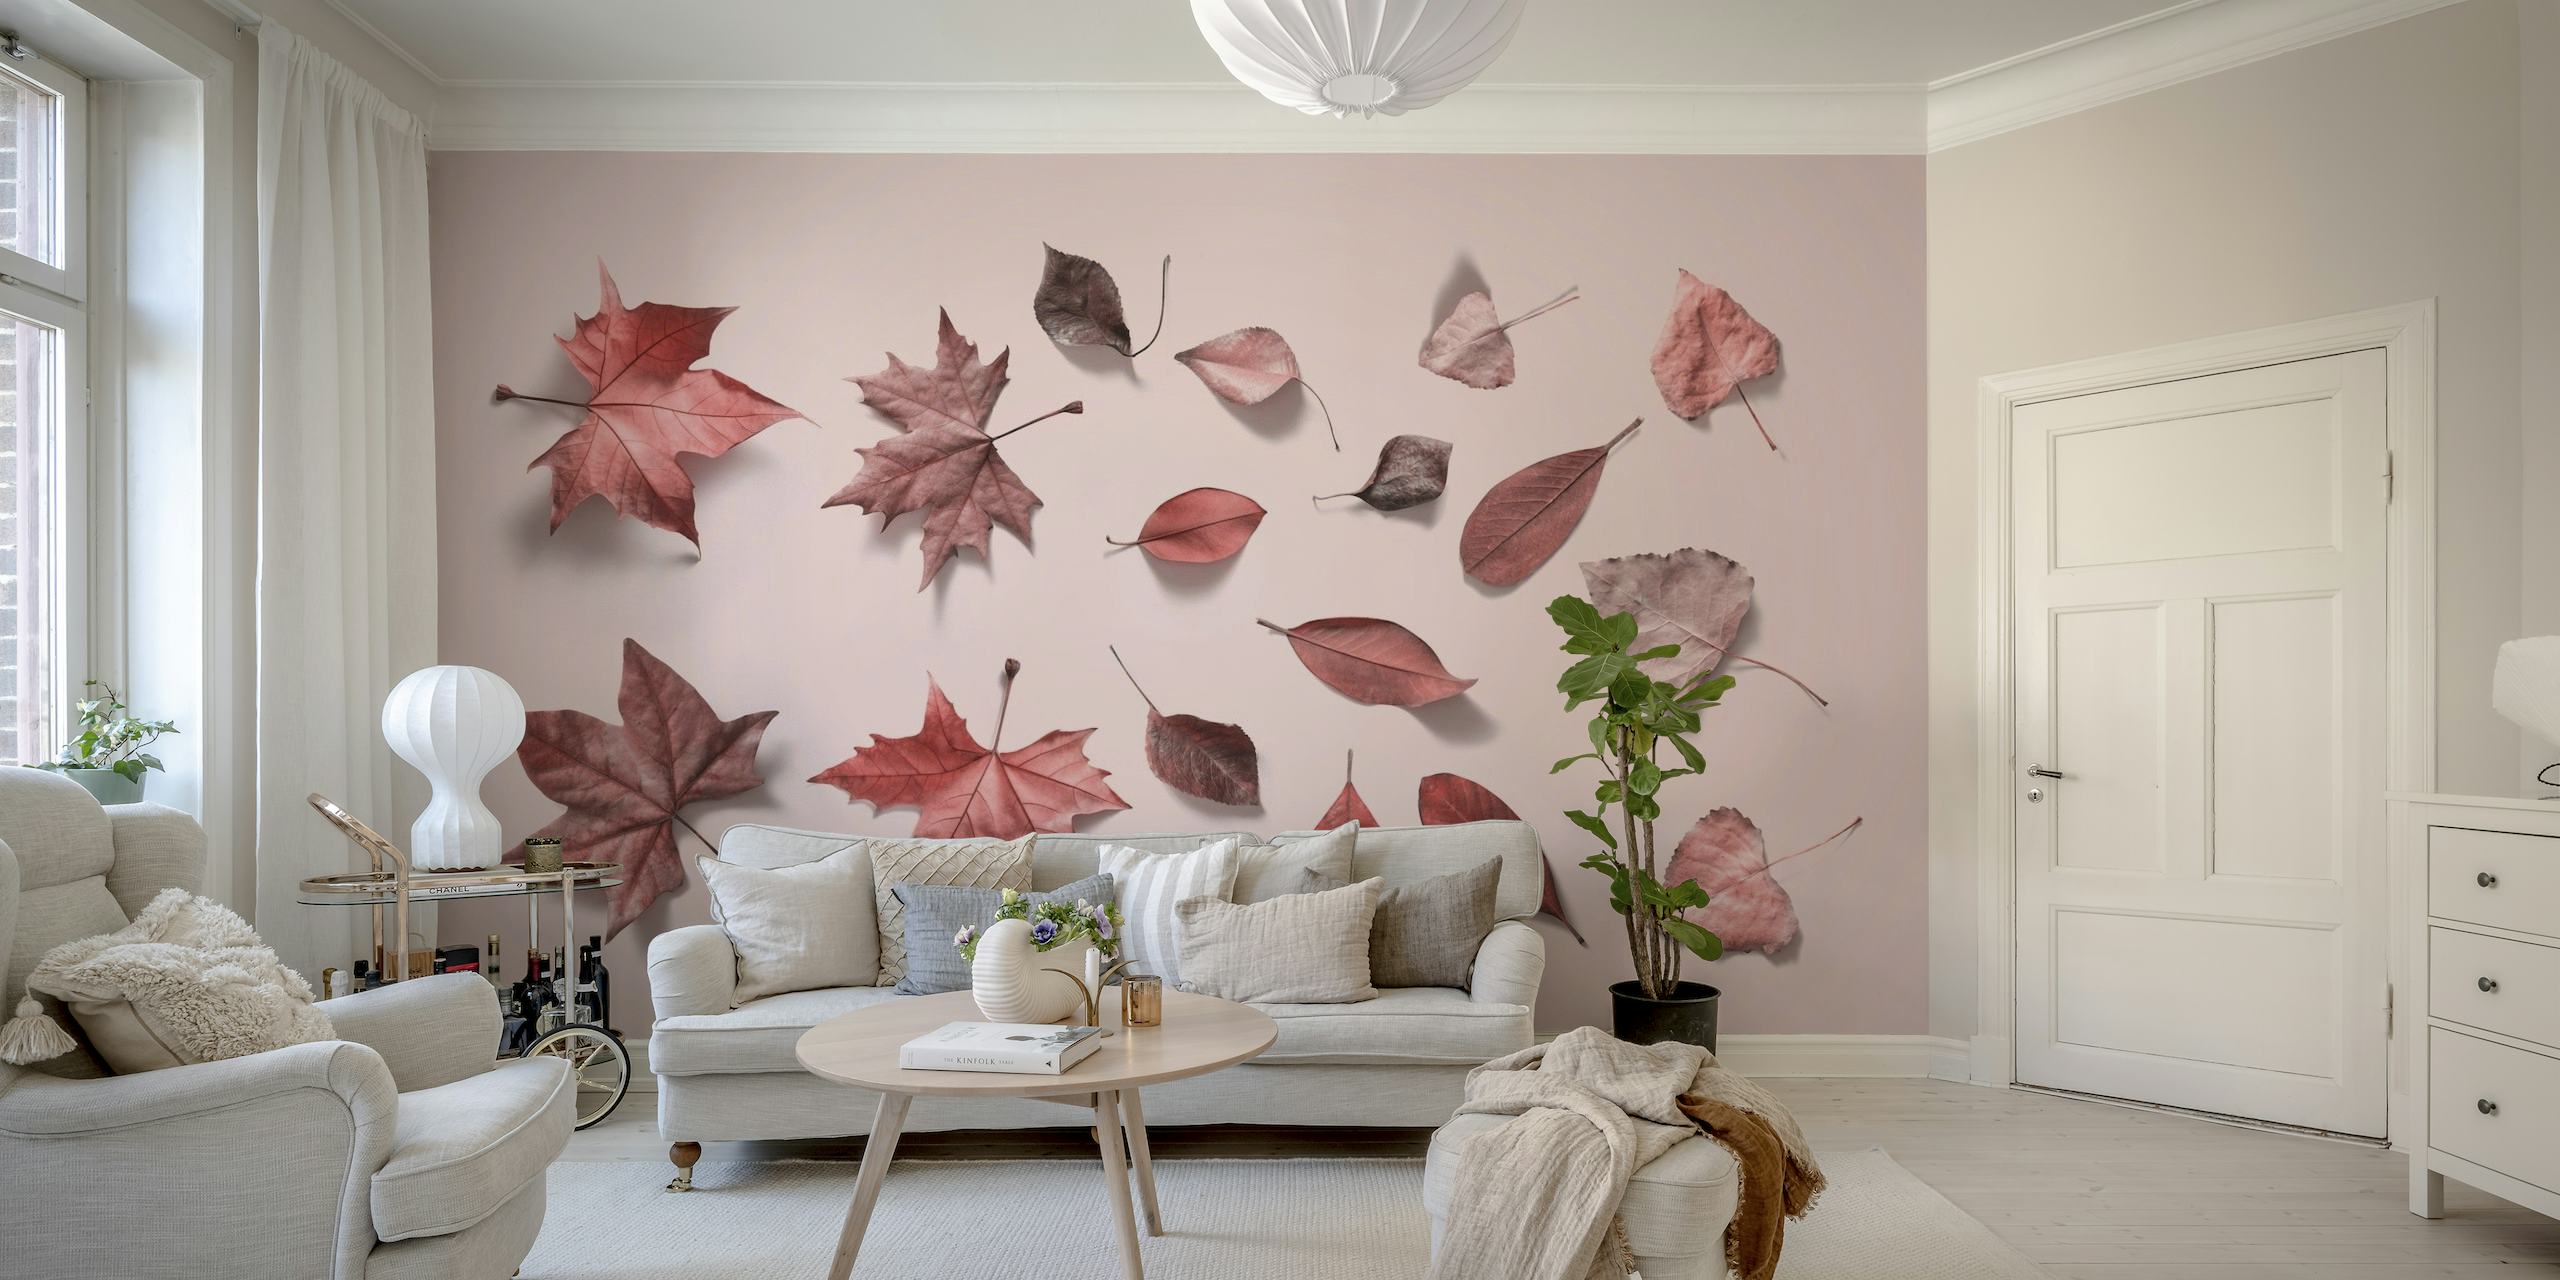 Light pink wall mural with a scattered arrangement of autumn leaves in various pink shades.